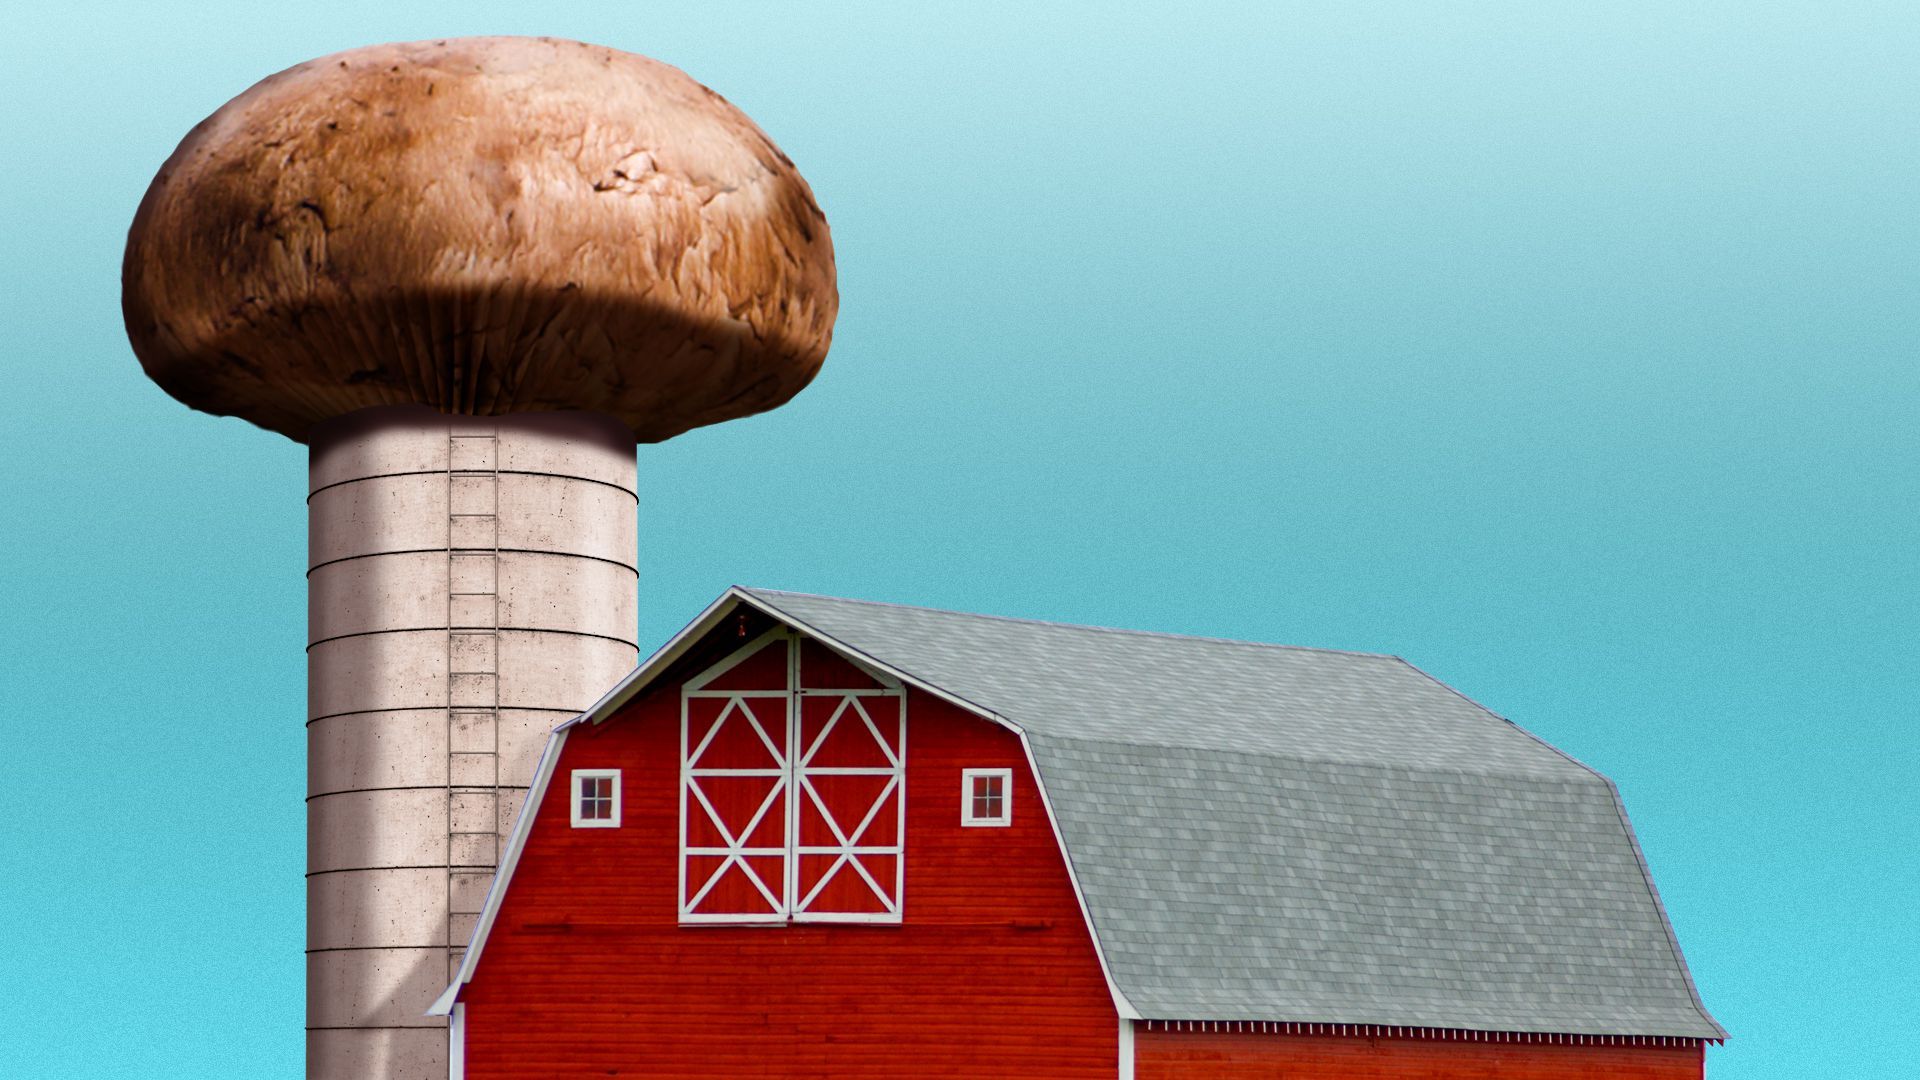 Illustration of a barn and a silo with a mushroom top